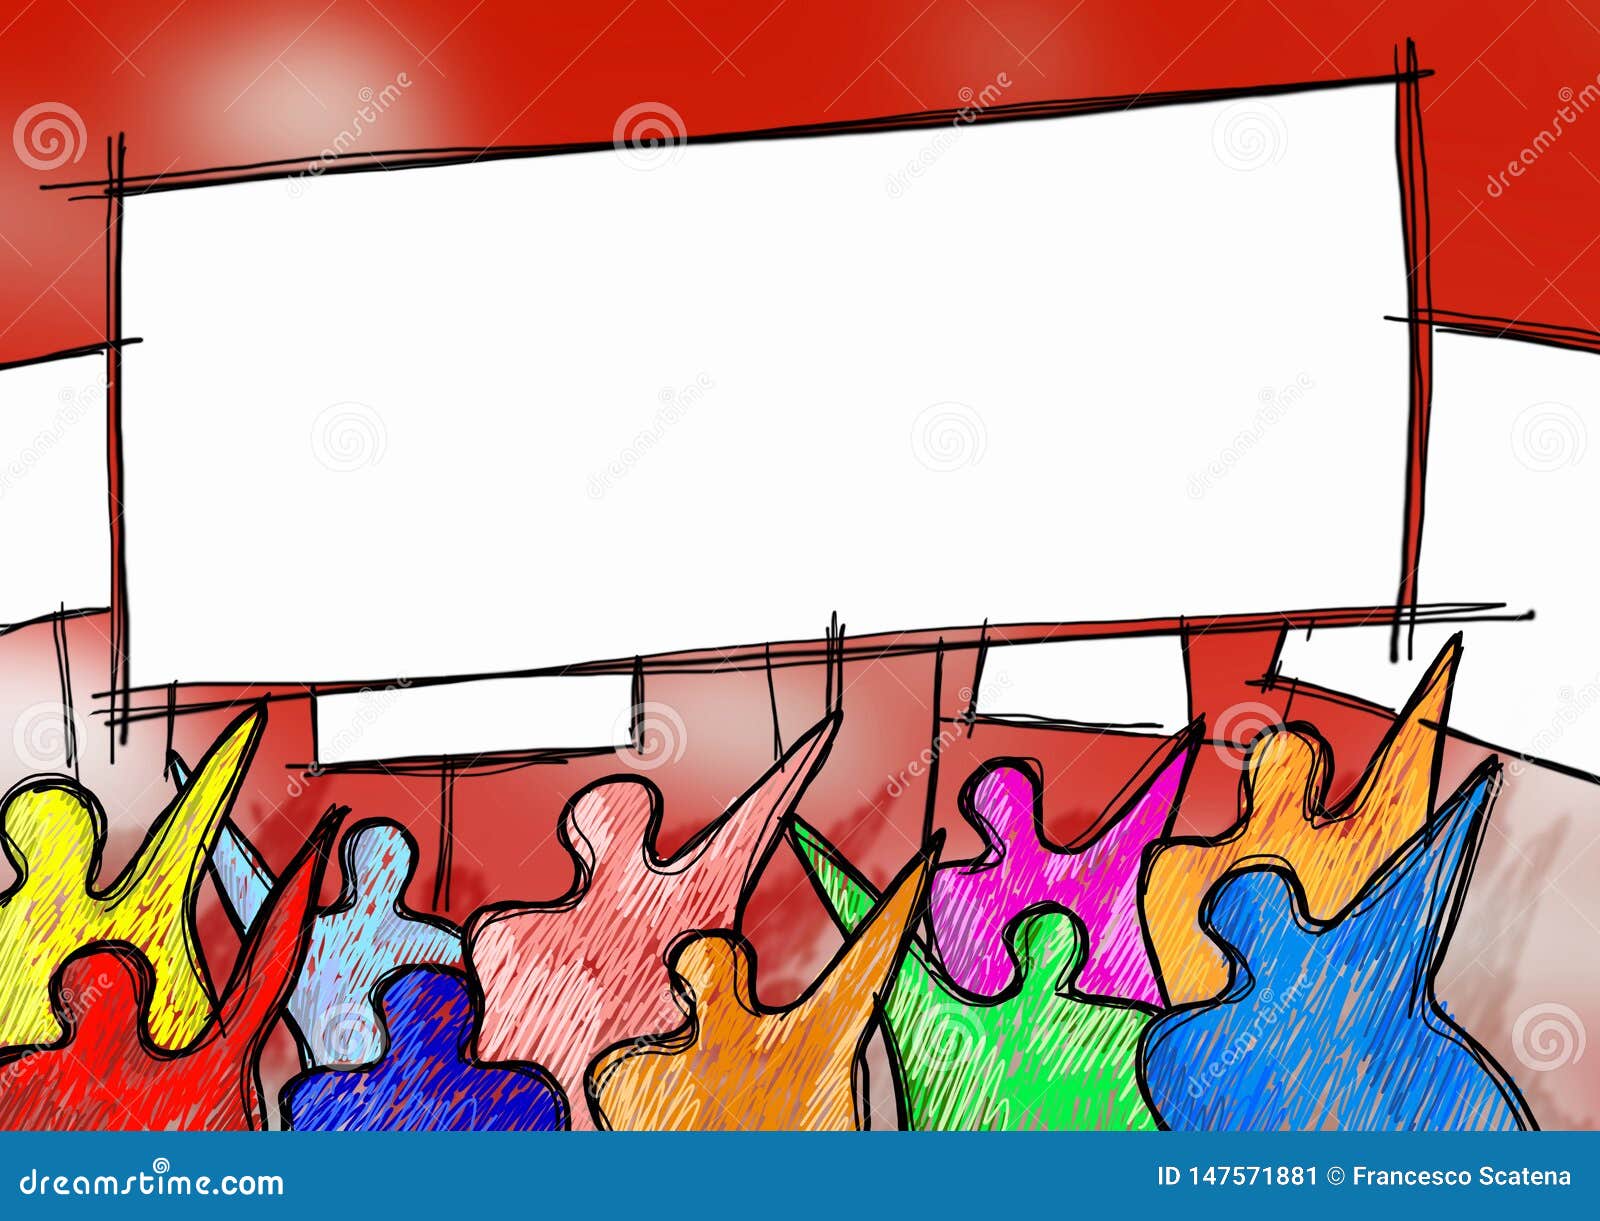 social problems concept image. a group of people protest to enforce their rights - image with space for text insertion